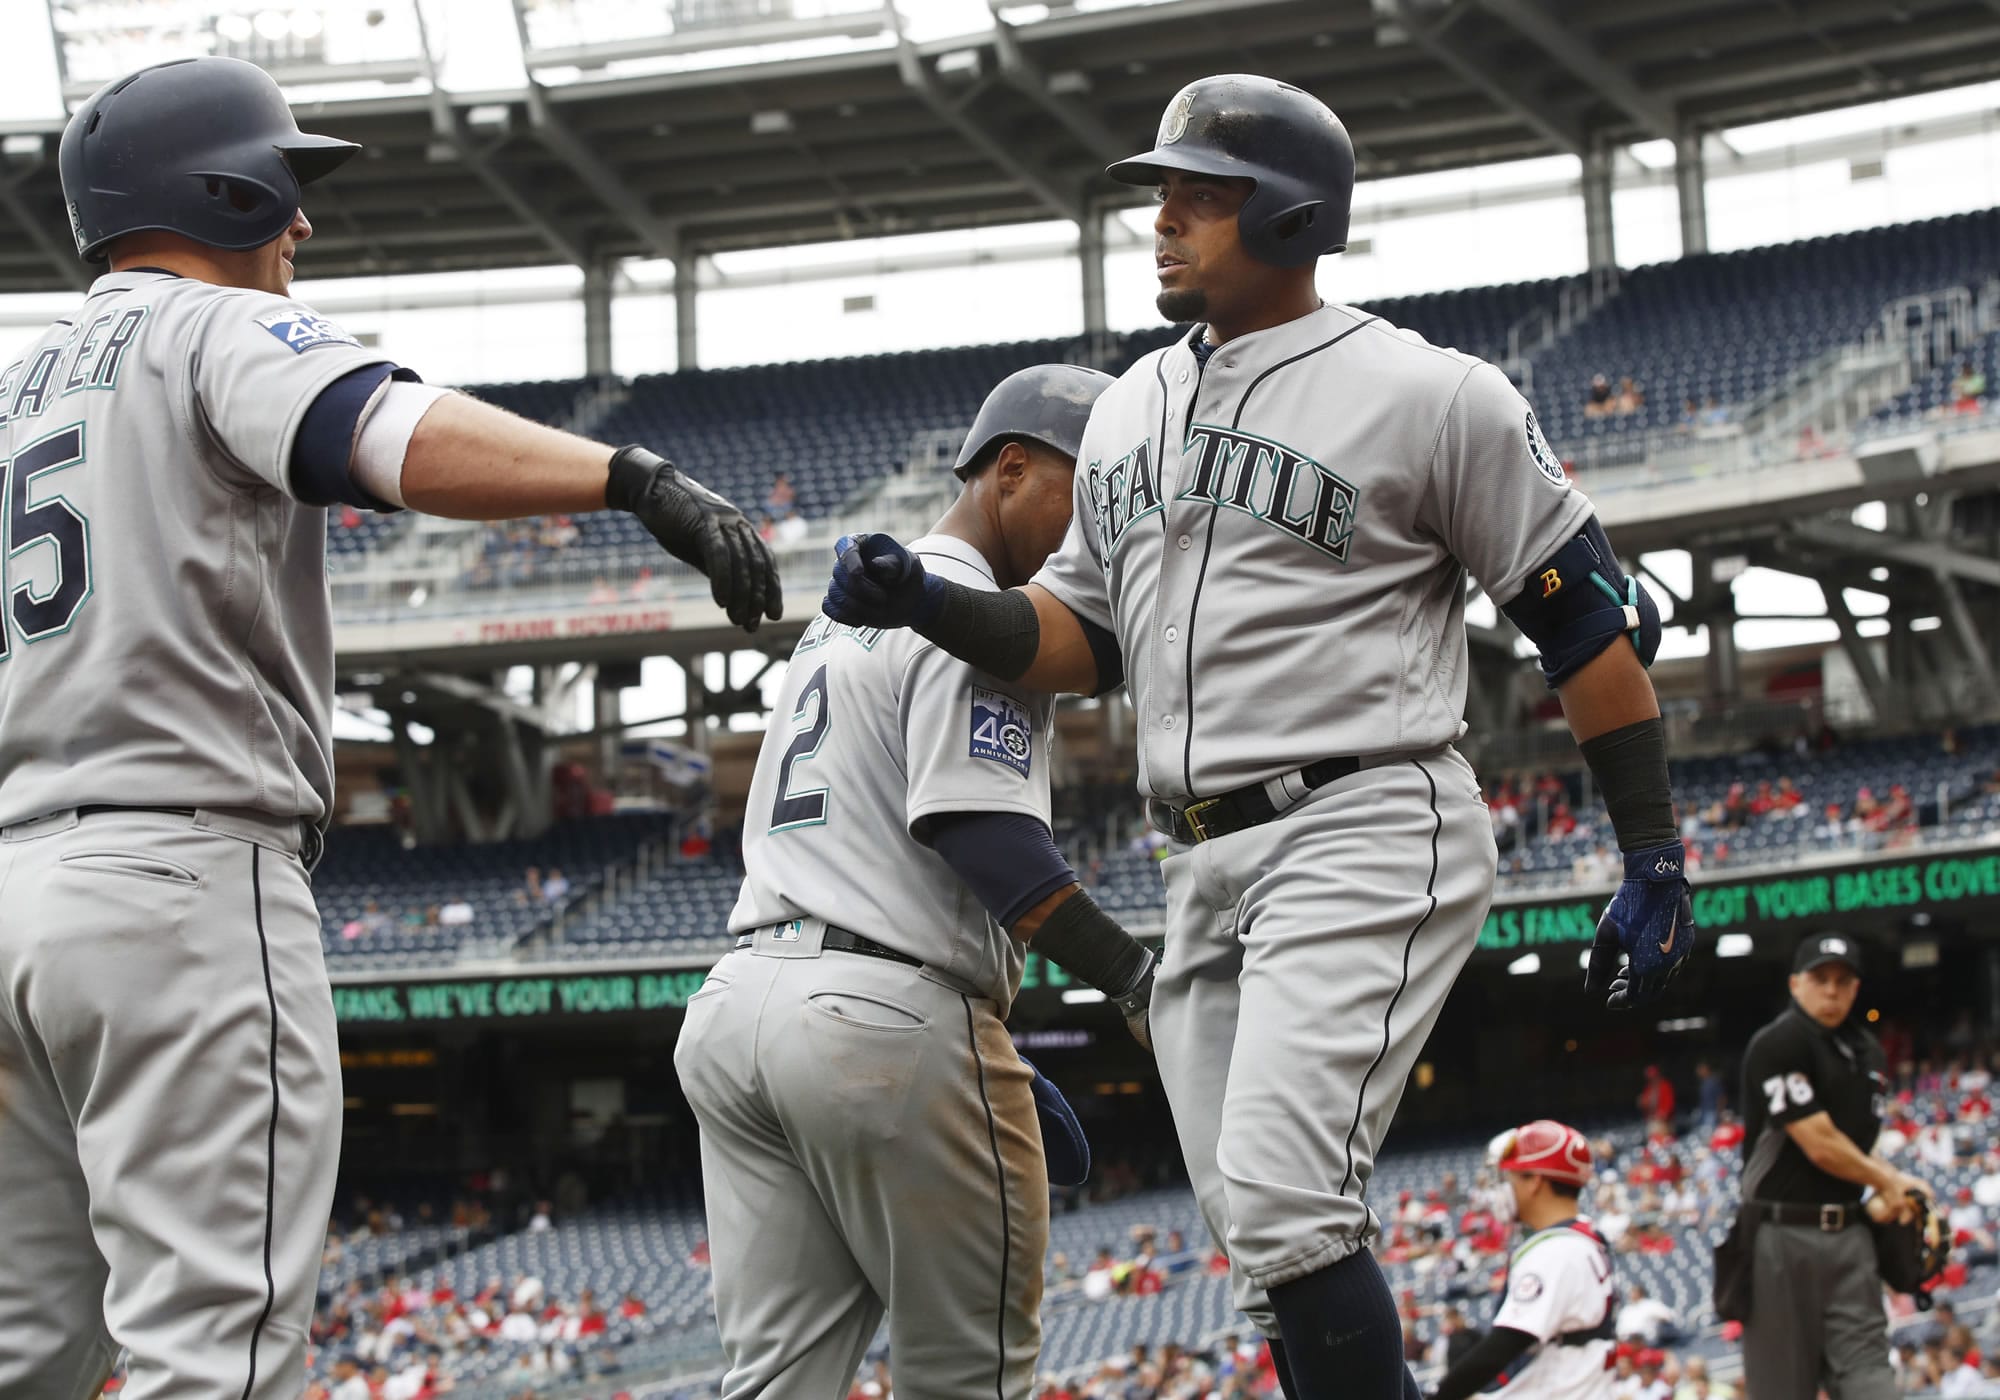 Seattle Mariners Nelson Cruz, right, celebrates with teammates, Kyle Seager, left, and Jean Segura (2) after hitting a three-run home run during the sixth inning of a baseball game against the Washington Nationals in Washington, Thursday, May 25, 2017. The Mariners won 4-2.